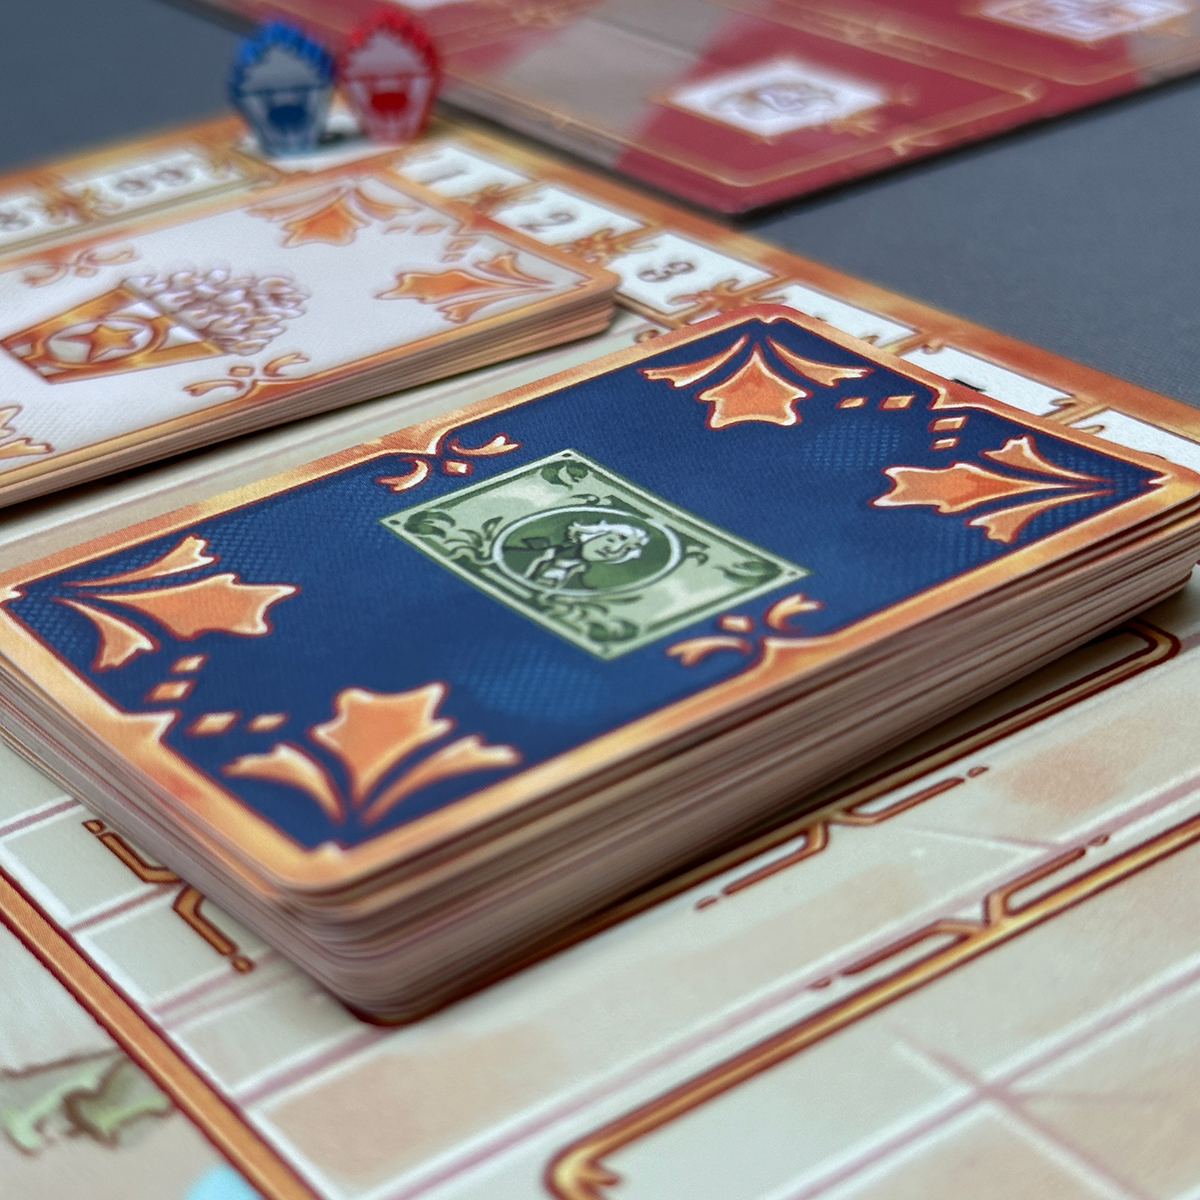 3 Ring Circus board game review money cards